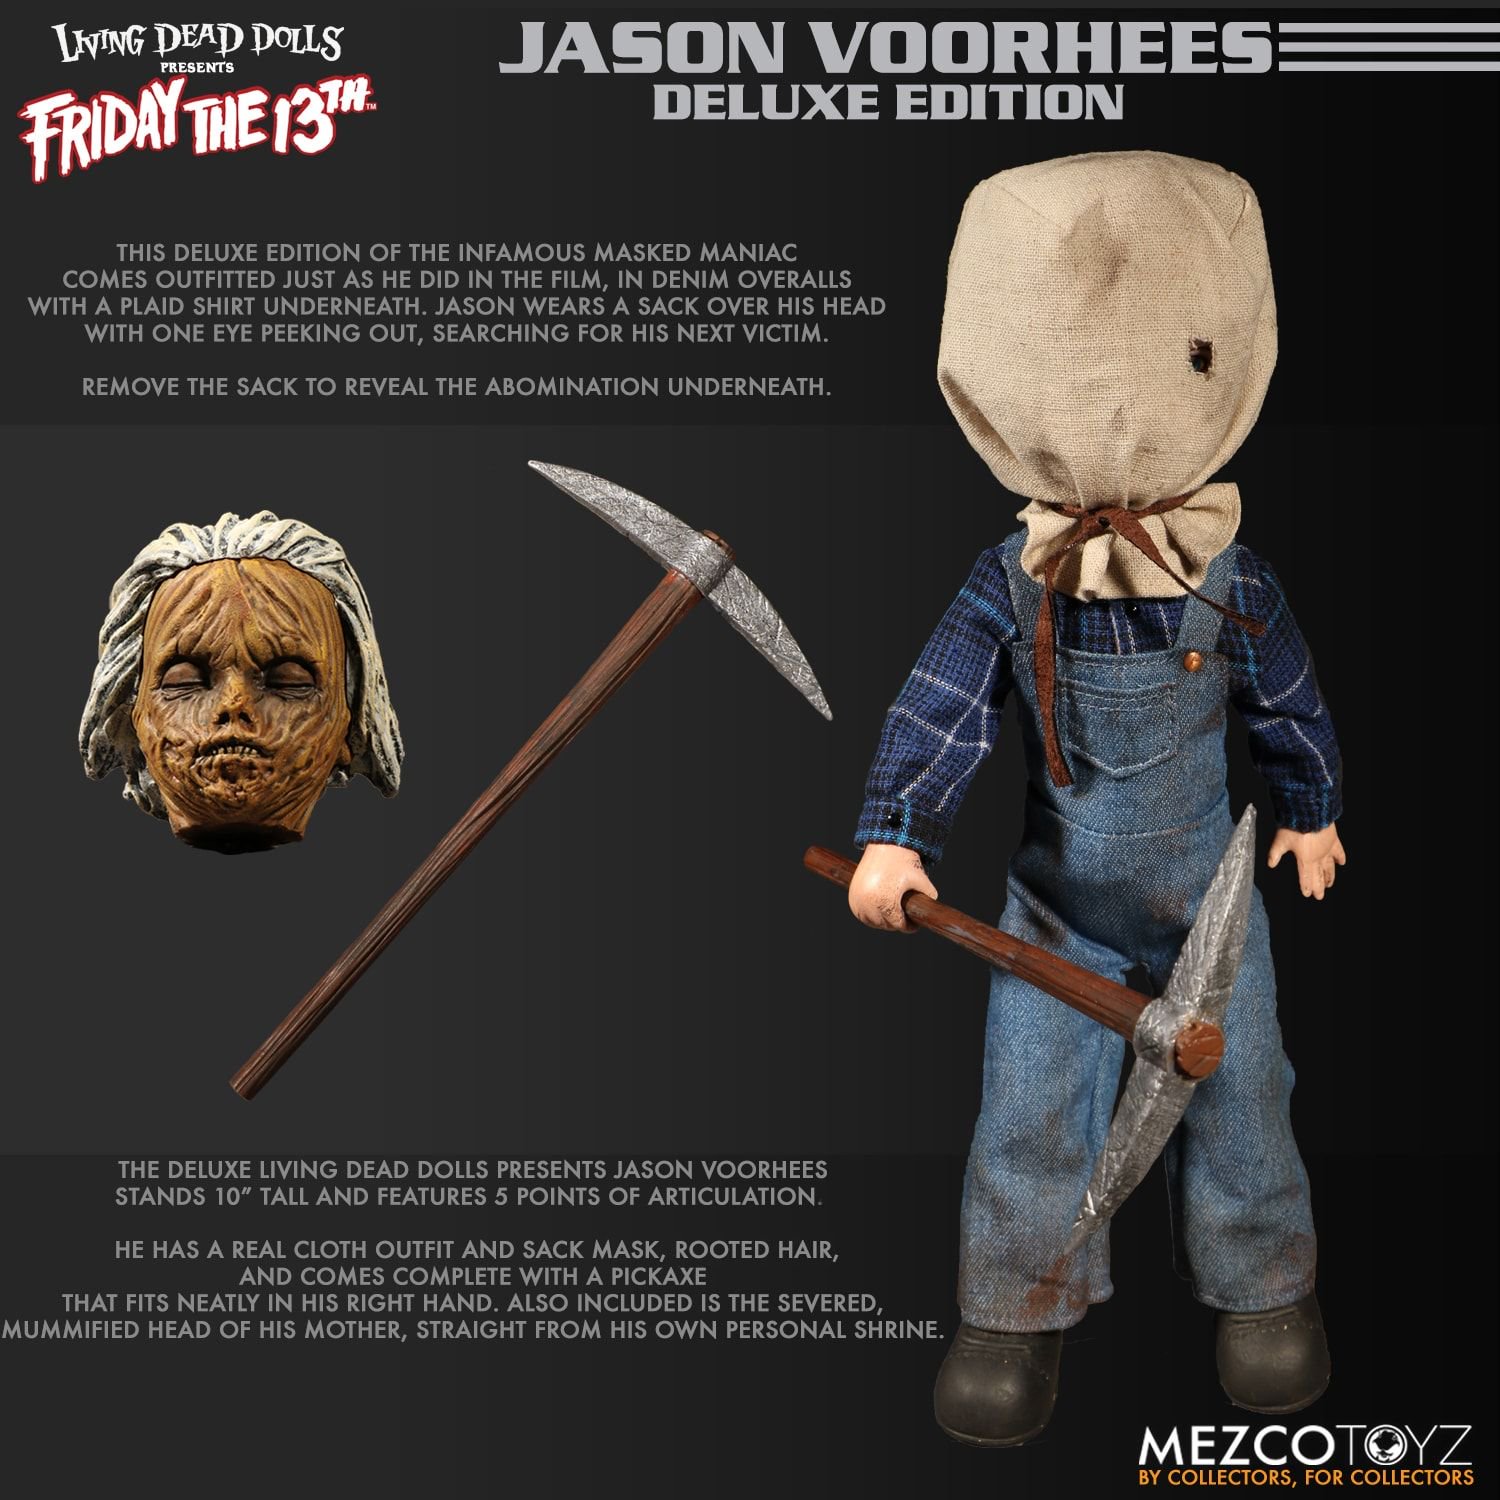 MEZCO Living Dead Dolls Friday the 13th Part 2: Jason Voorhees